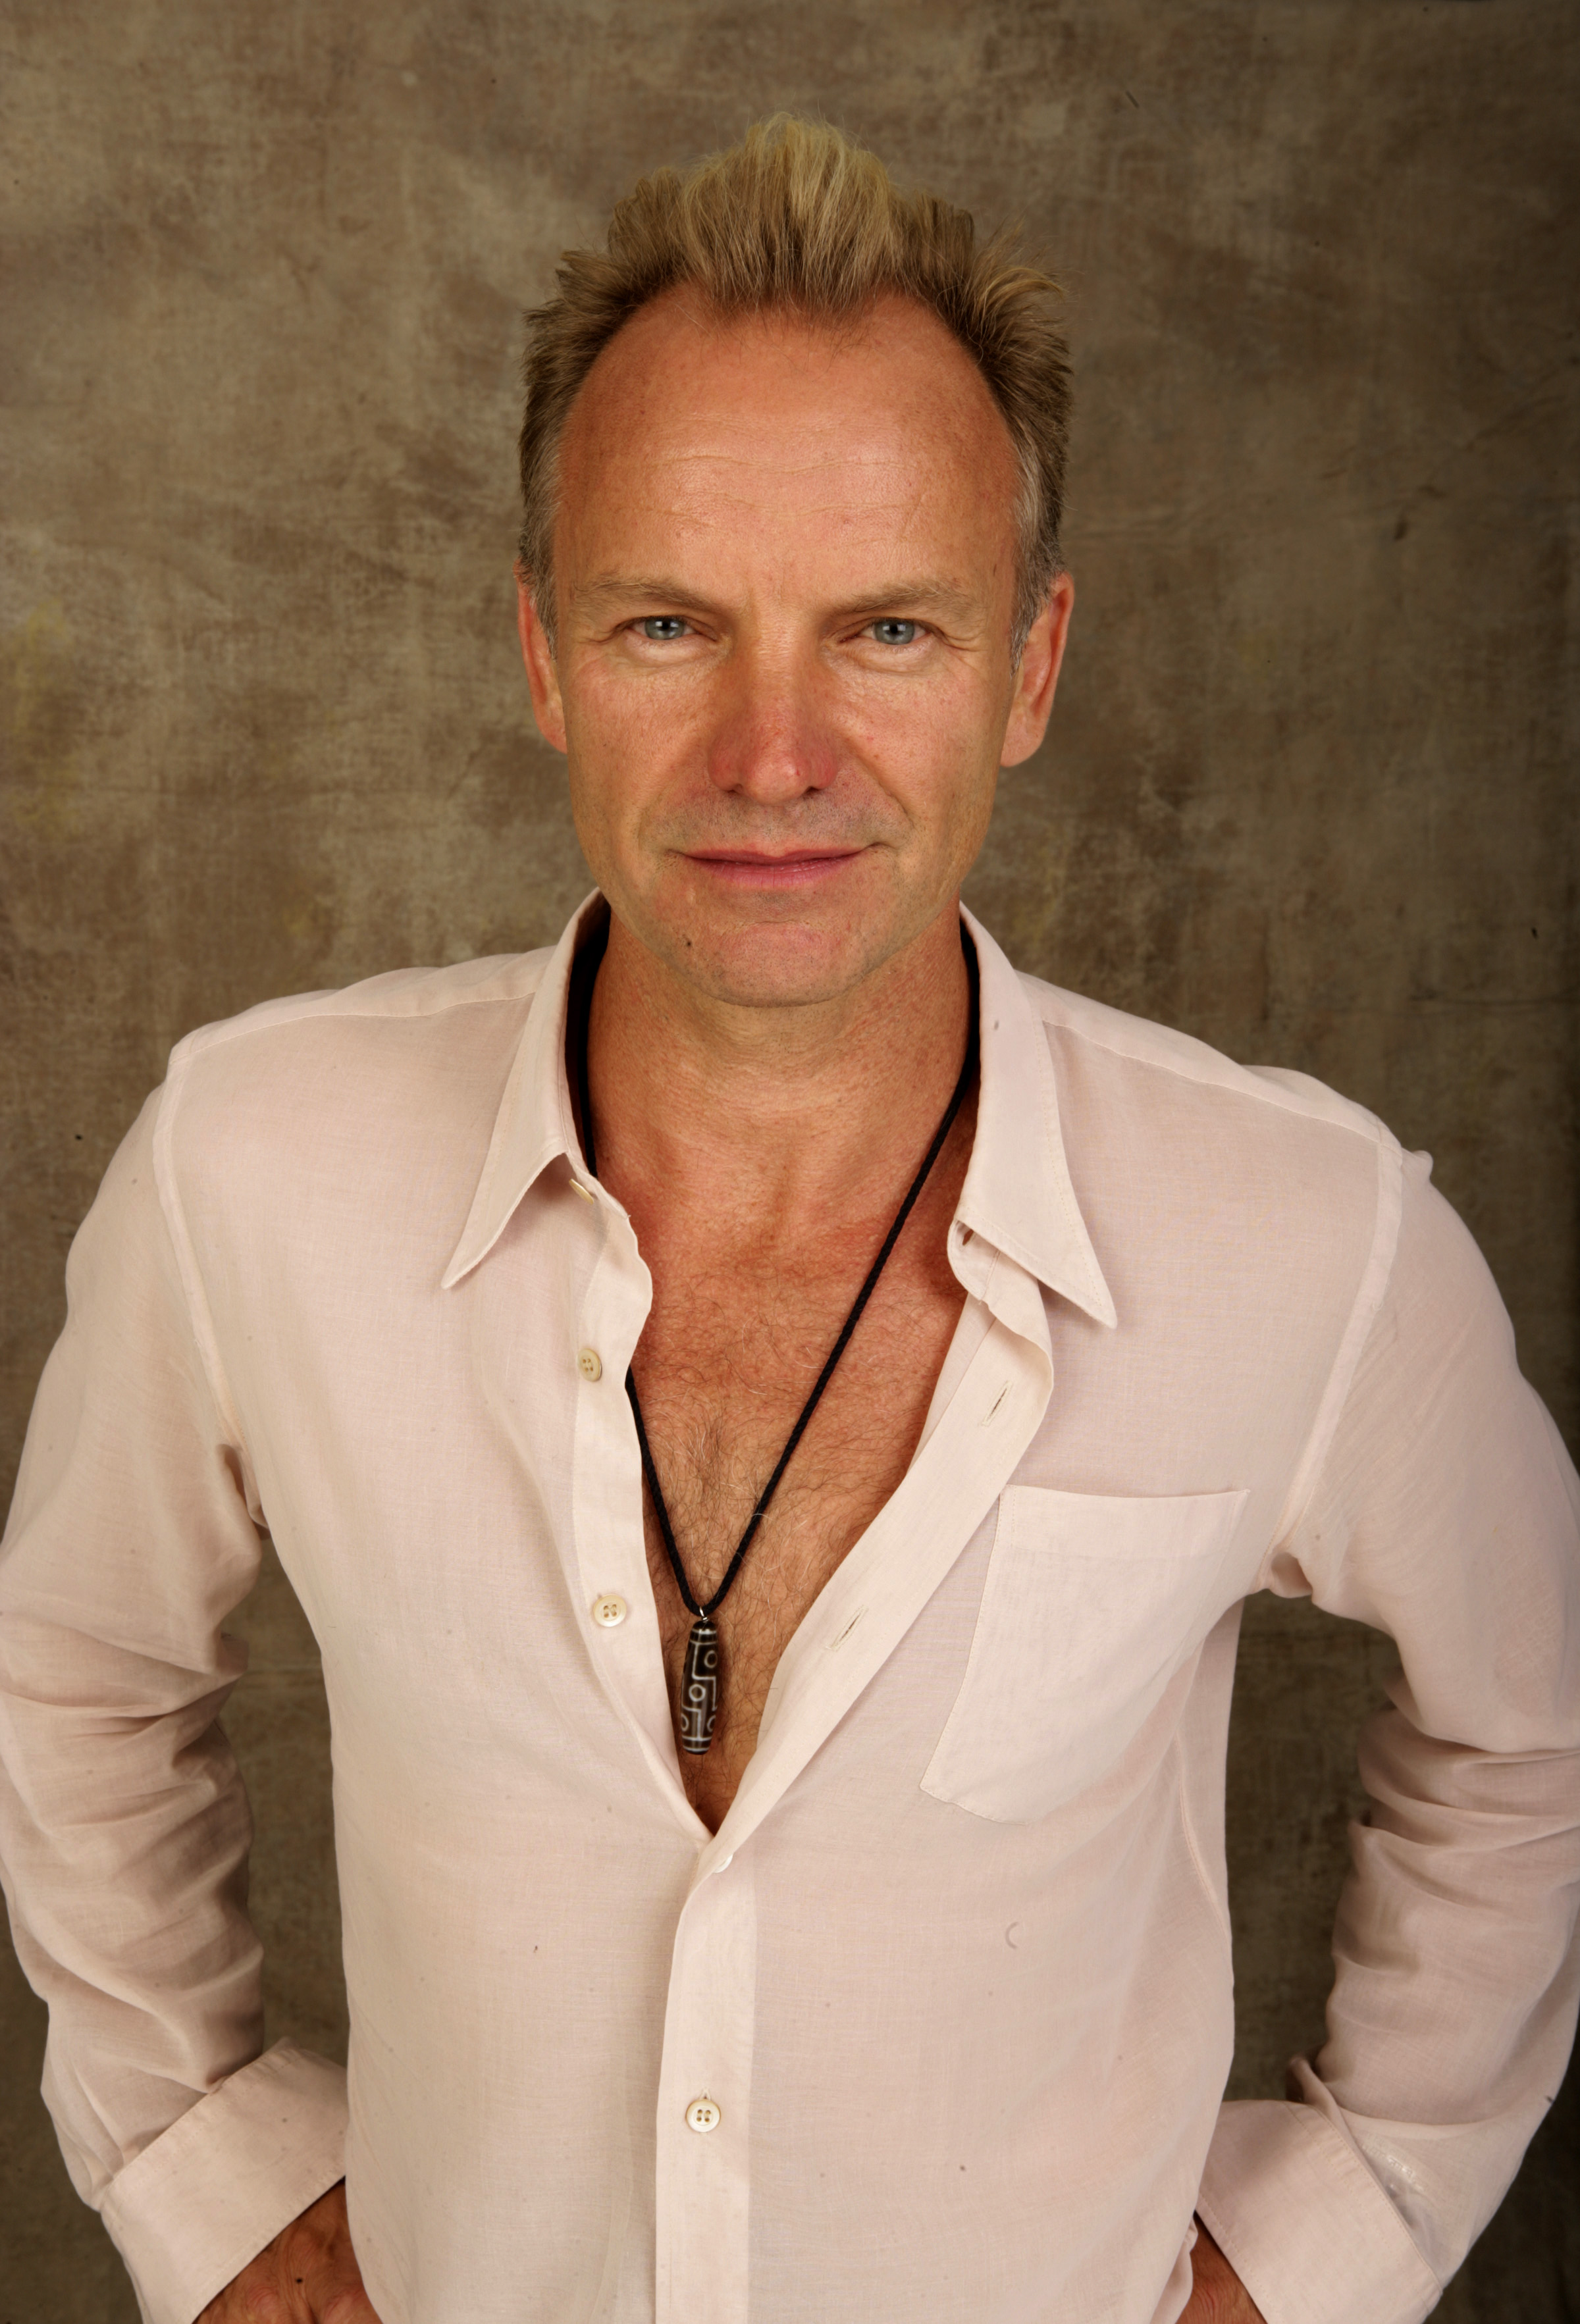 Sting poses for a studio portrait backstage at "Live 8 London" in Hyde Park in London, England on July 2, 2005. | Source: Getty Images